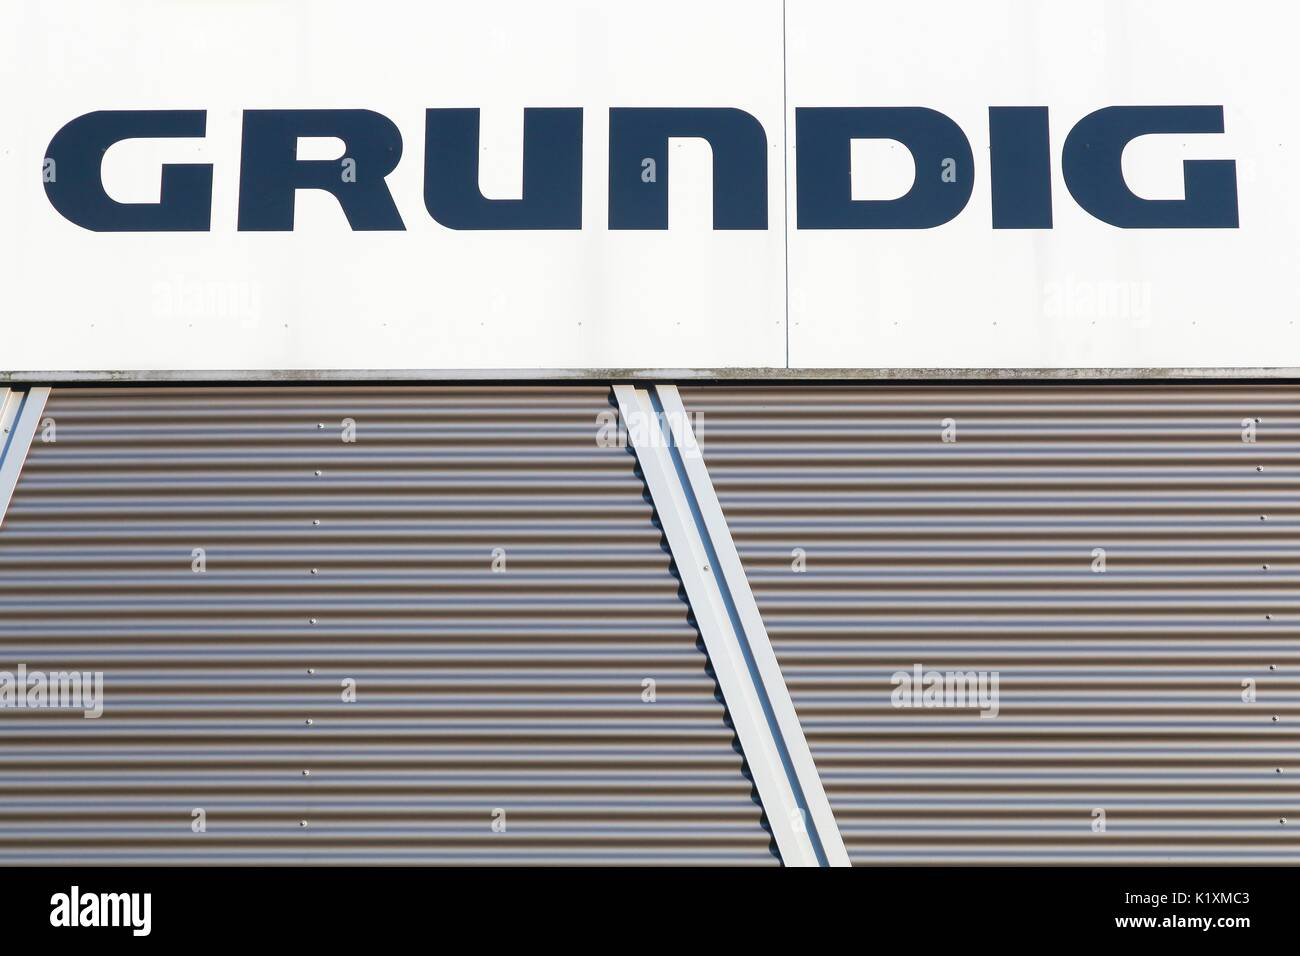 Dortmund, Germany - July 21, 2017: Grundig logo on a wall. Grundig is a German manufacturer of consumer electronics and domestic appliances Stock Photo